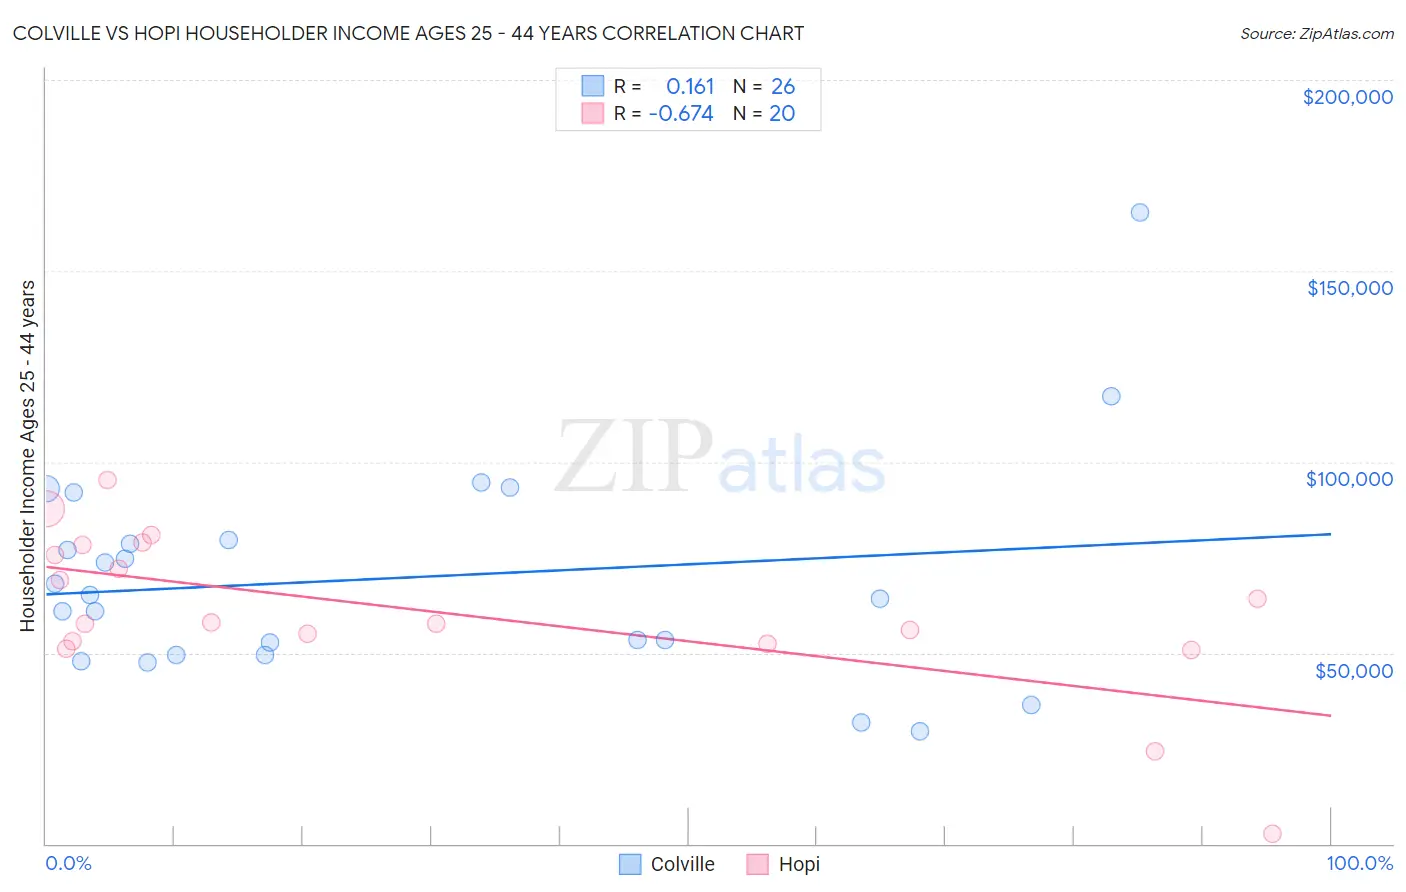 Colville vs Hopi Householder Income Ages 25 - 44 years